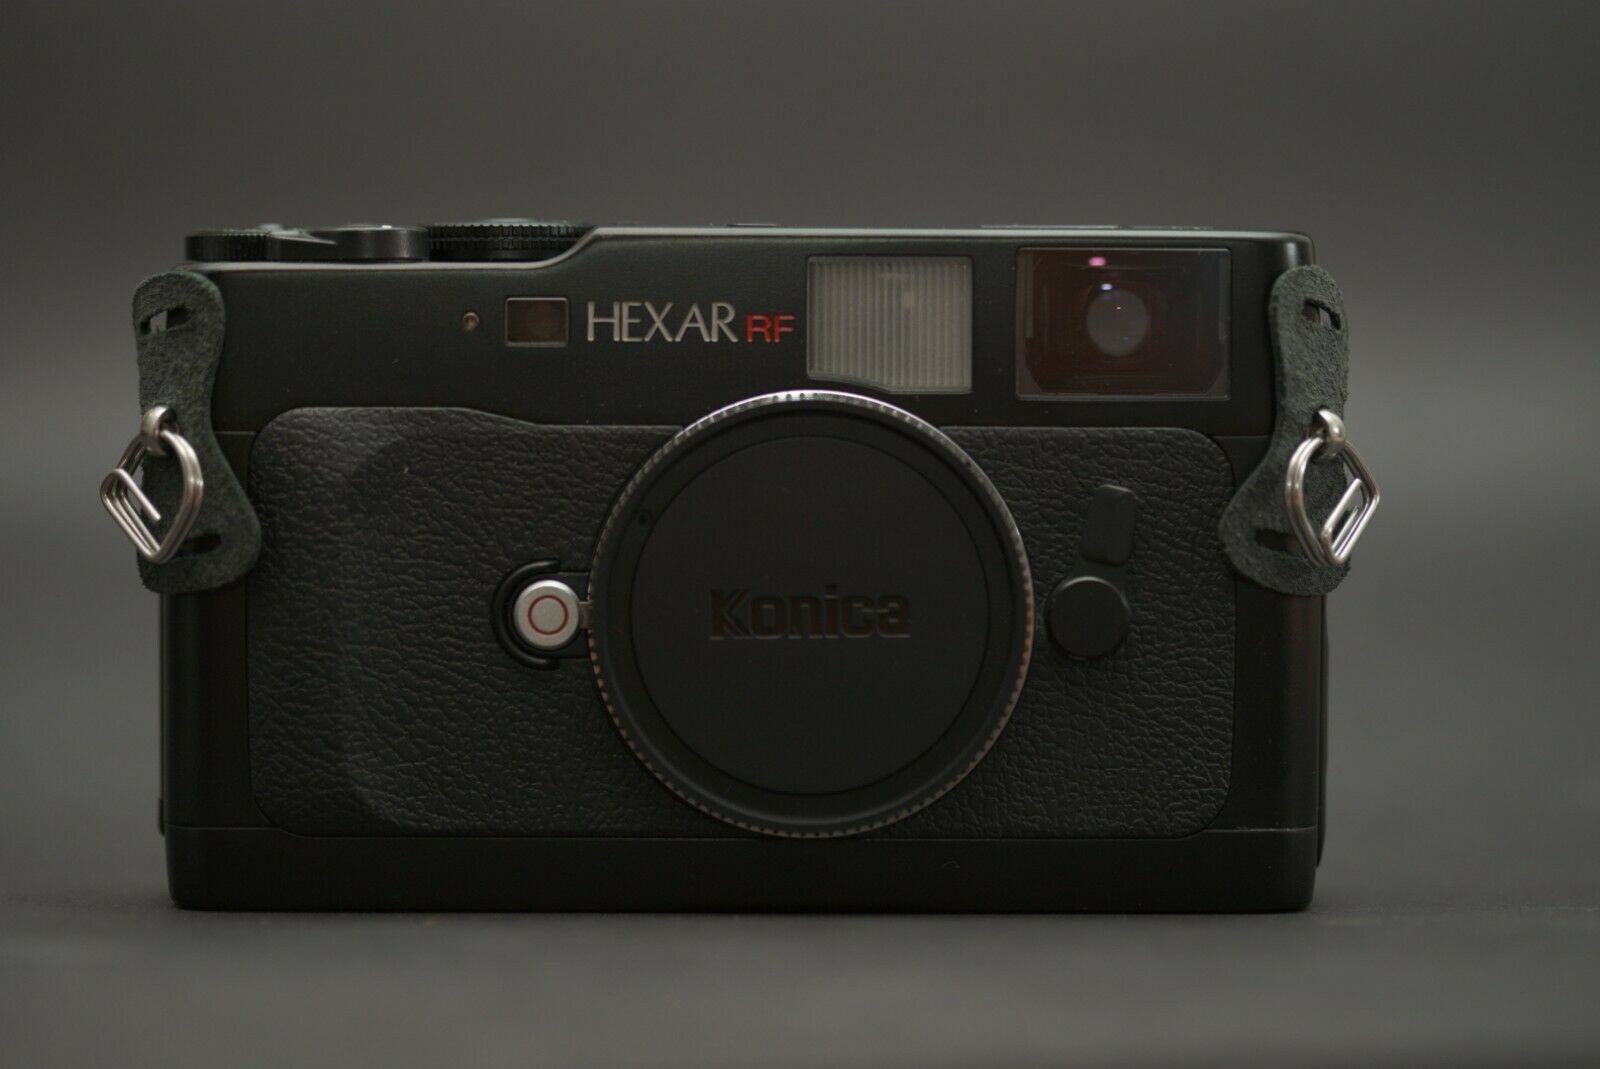 A Super Rare Mint Konica Hexar 72 Half-Frame is Up for Grabs